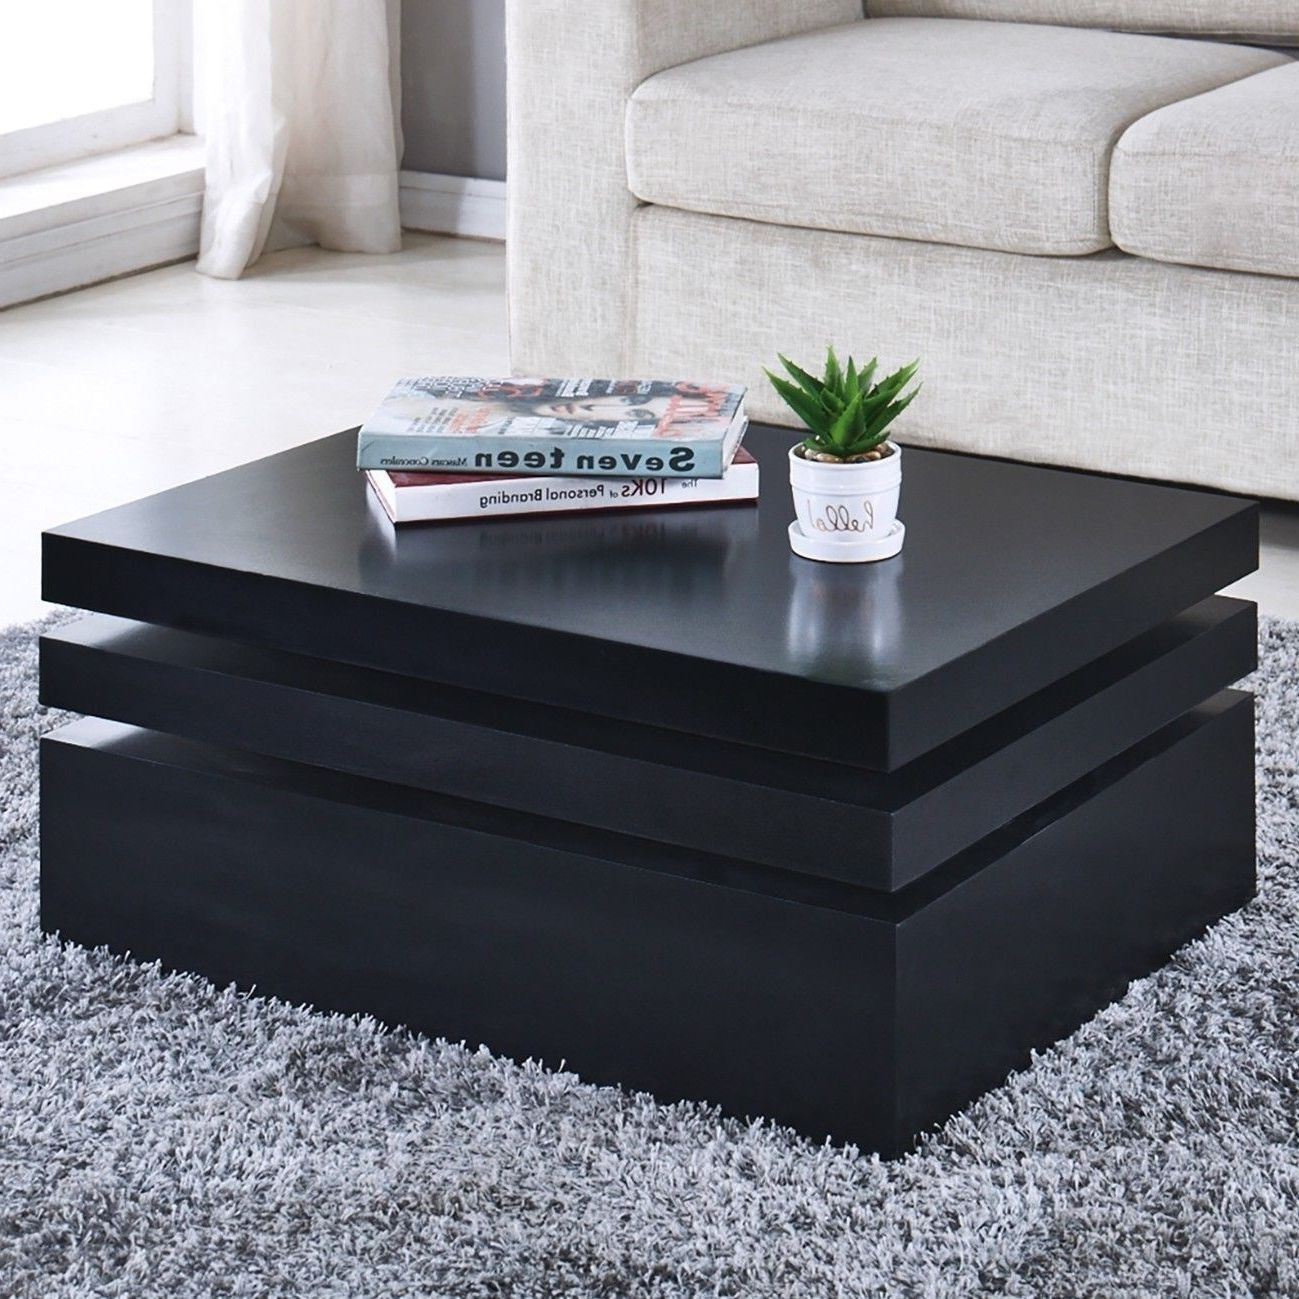 Black Square Coffee Table – Ideas On Foter In Current Black Square Coffee Tables (View 9 of 20)